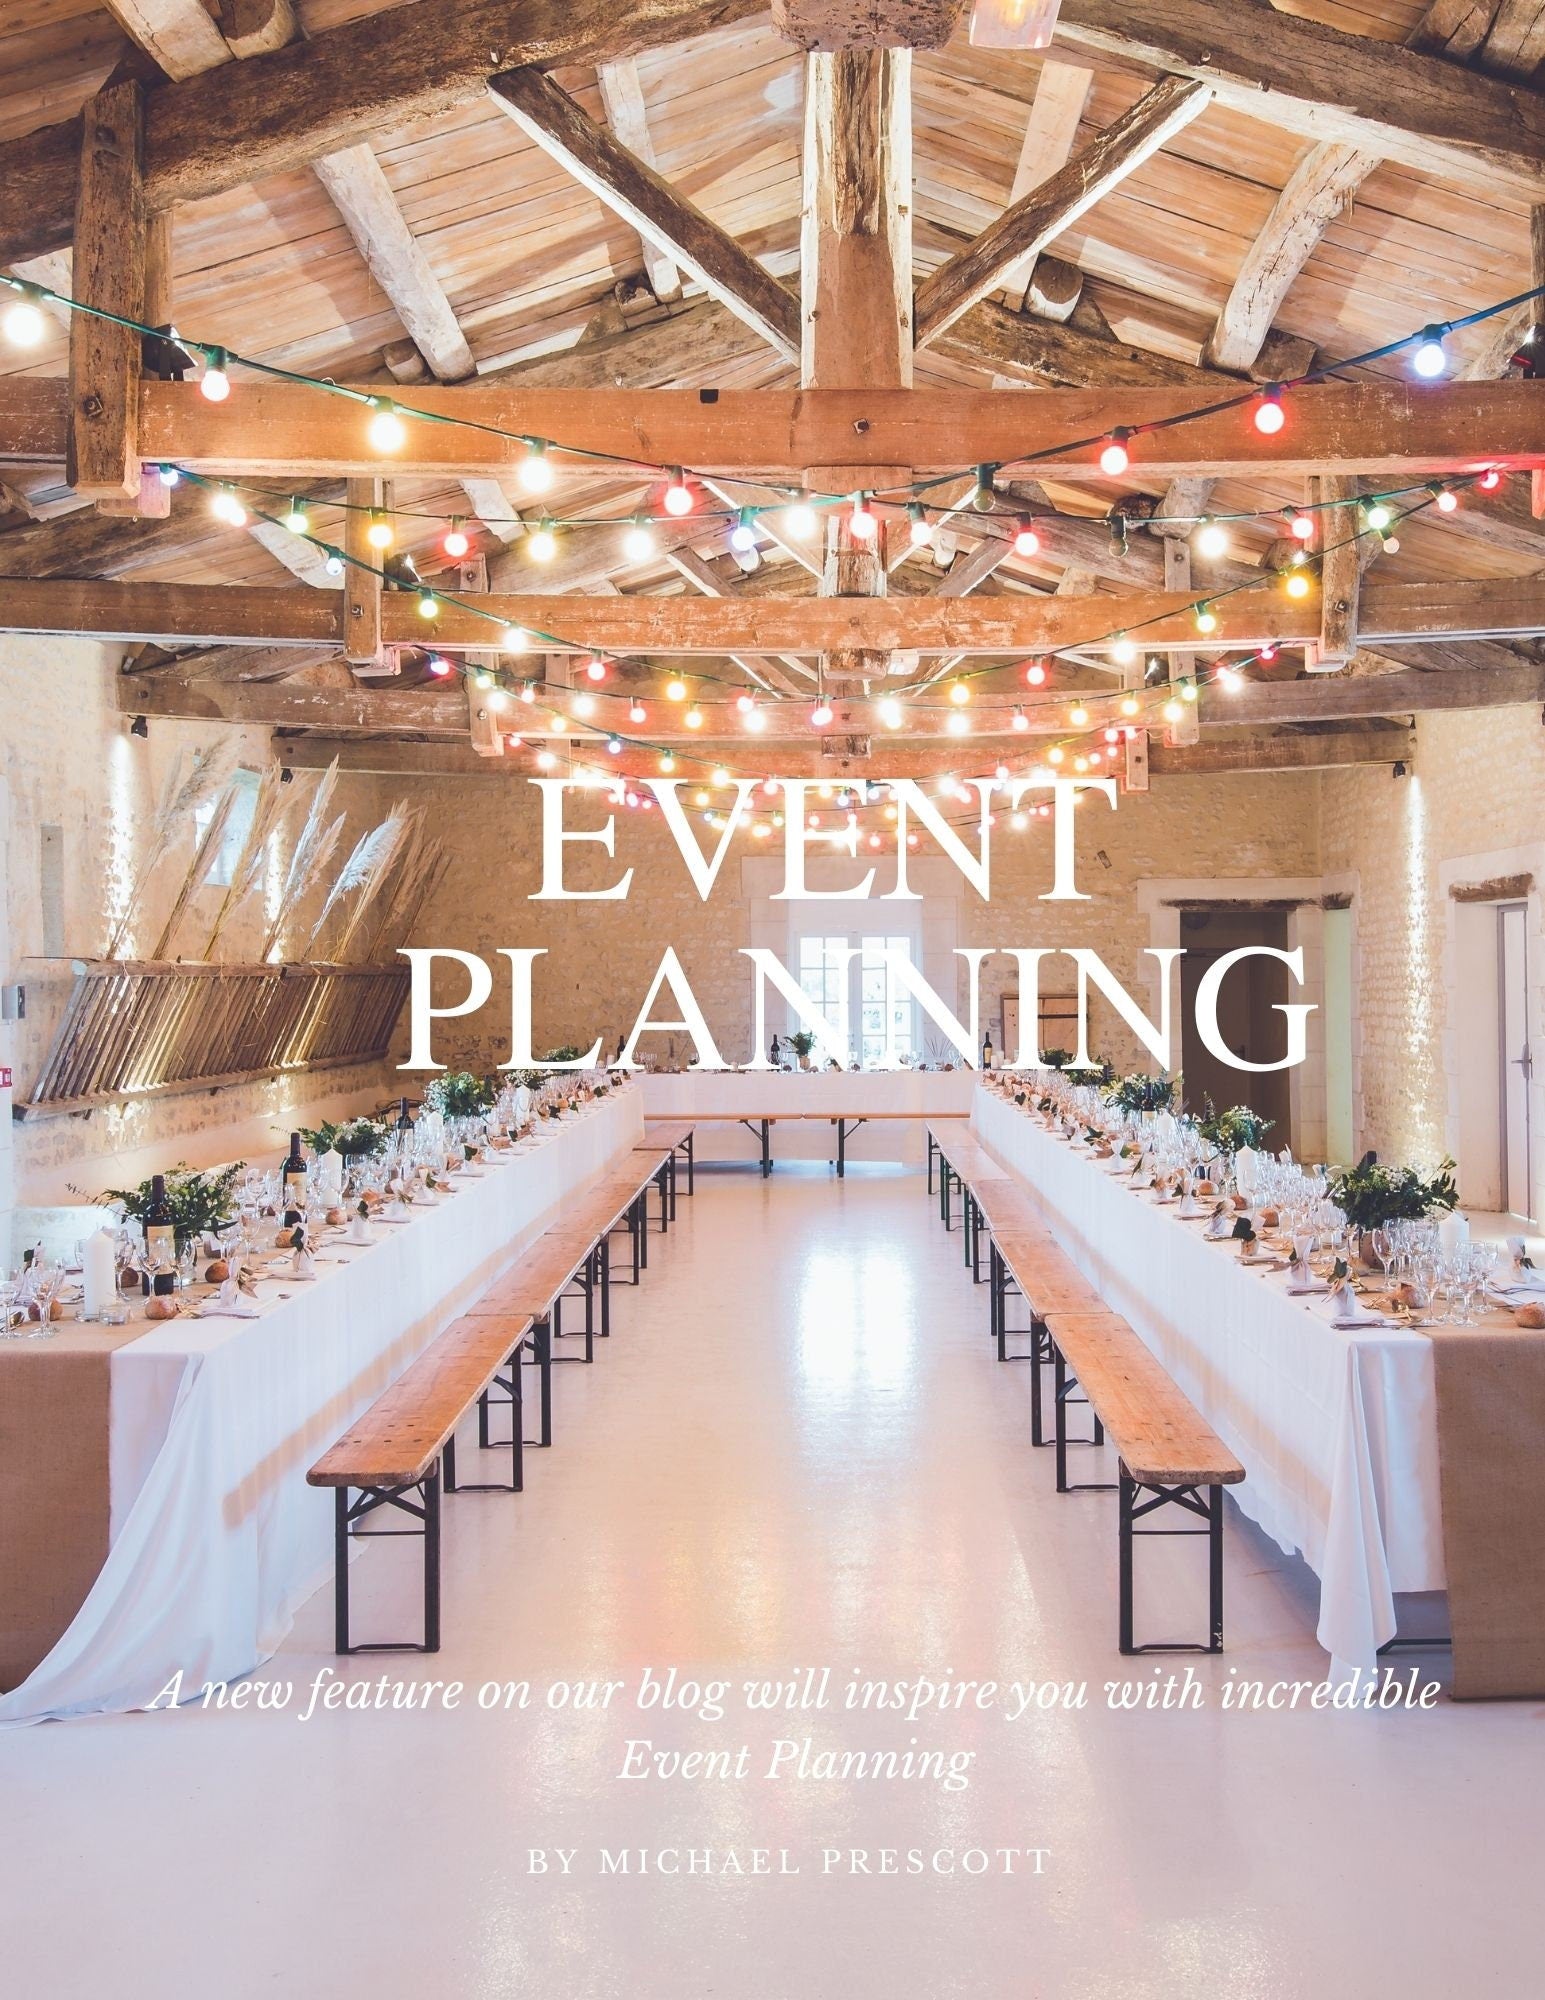 EVENT Planning E-book 40pgs Editable Template, Event Planning Business, Social Media Marketing, Business E-Book Gain Knowledge to Drive Sale